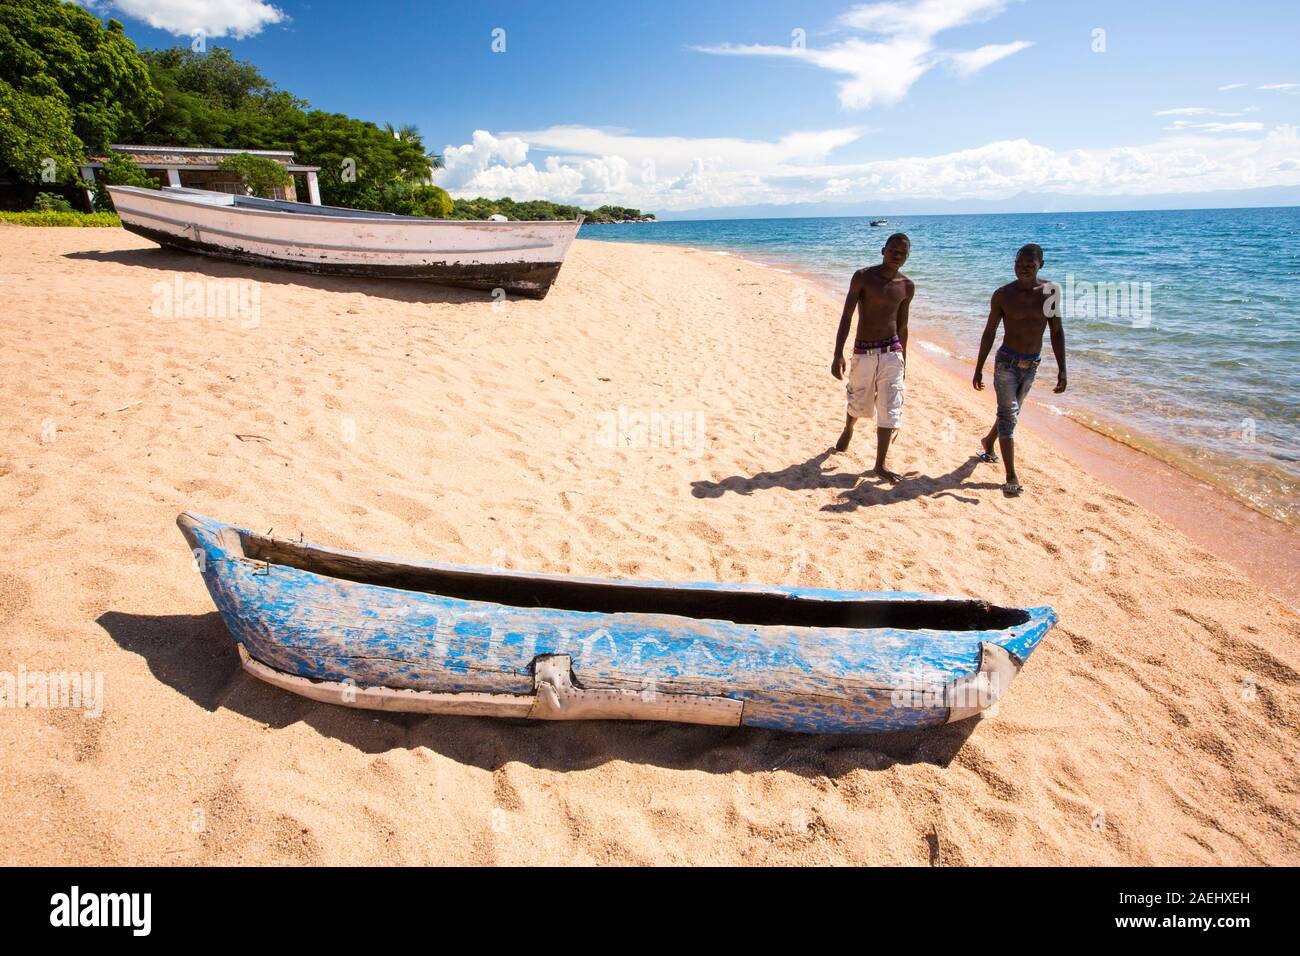 A traditional dug out canoe on a beach at Cape Maclear on the shores of Lake Malawi, Malawi, Africa. Stock Photo